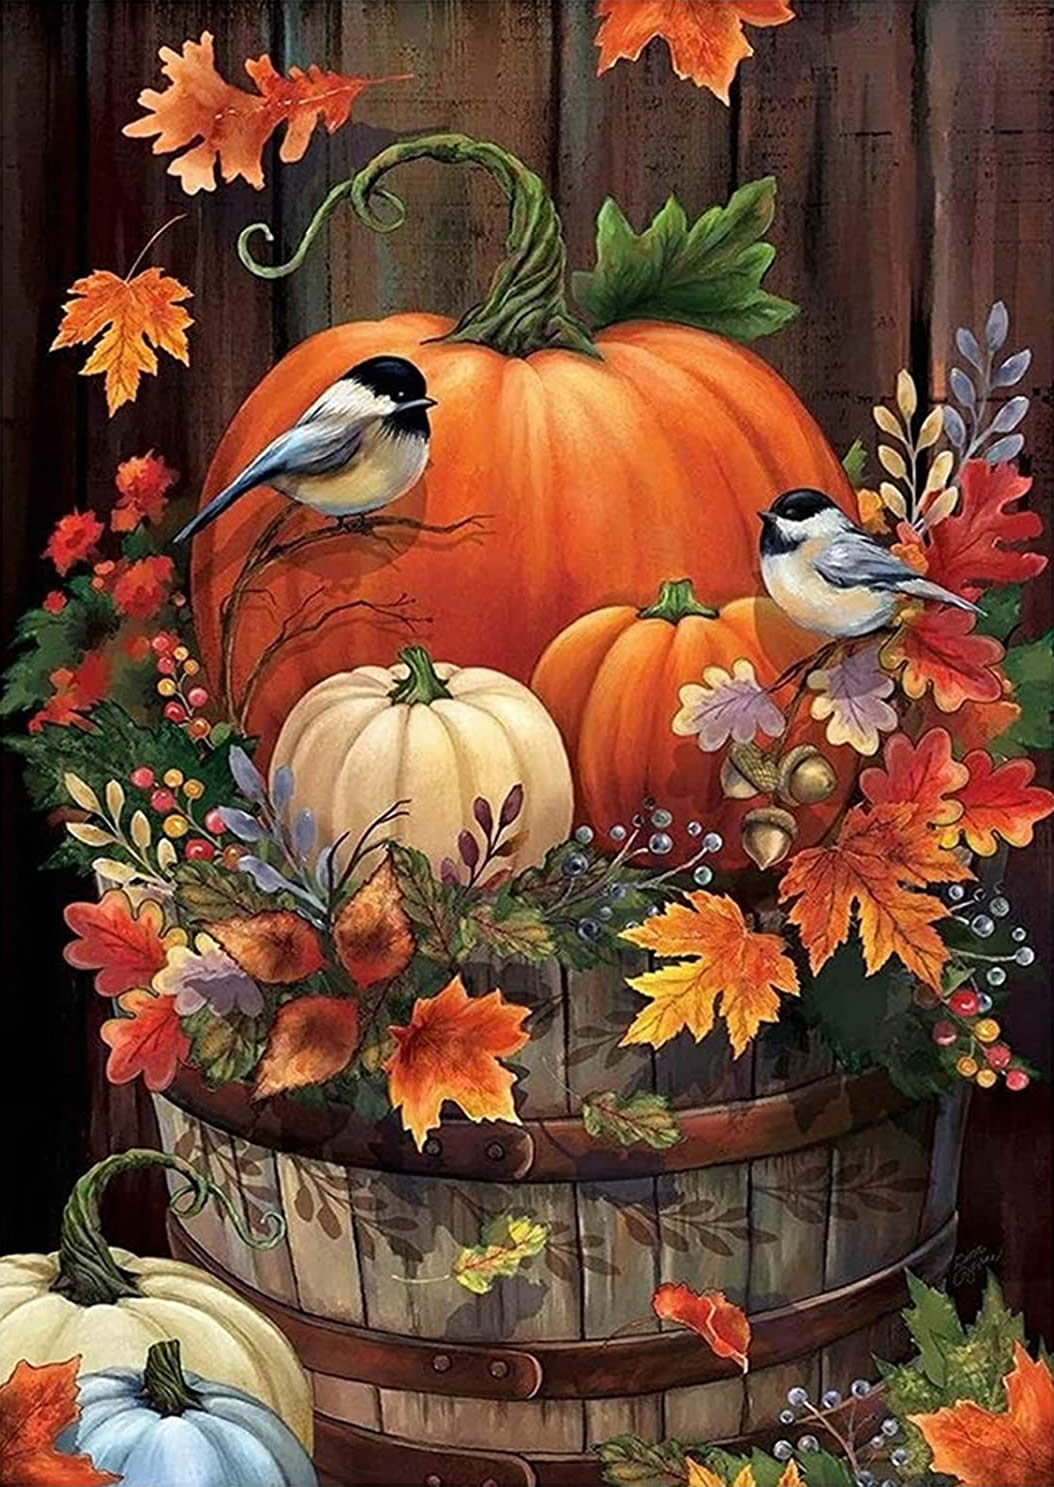 Diamond Painting Kits Finches And Pumpkins Fall Sign Home Diy For Adults